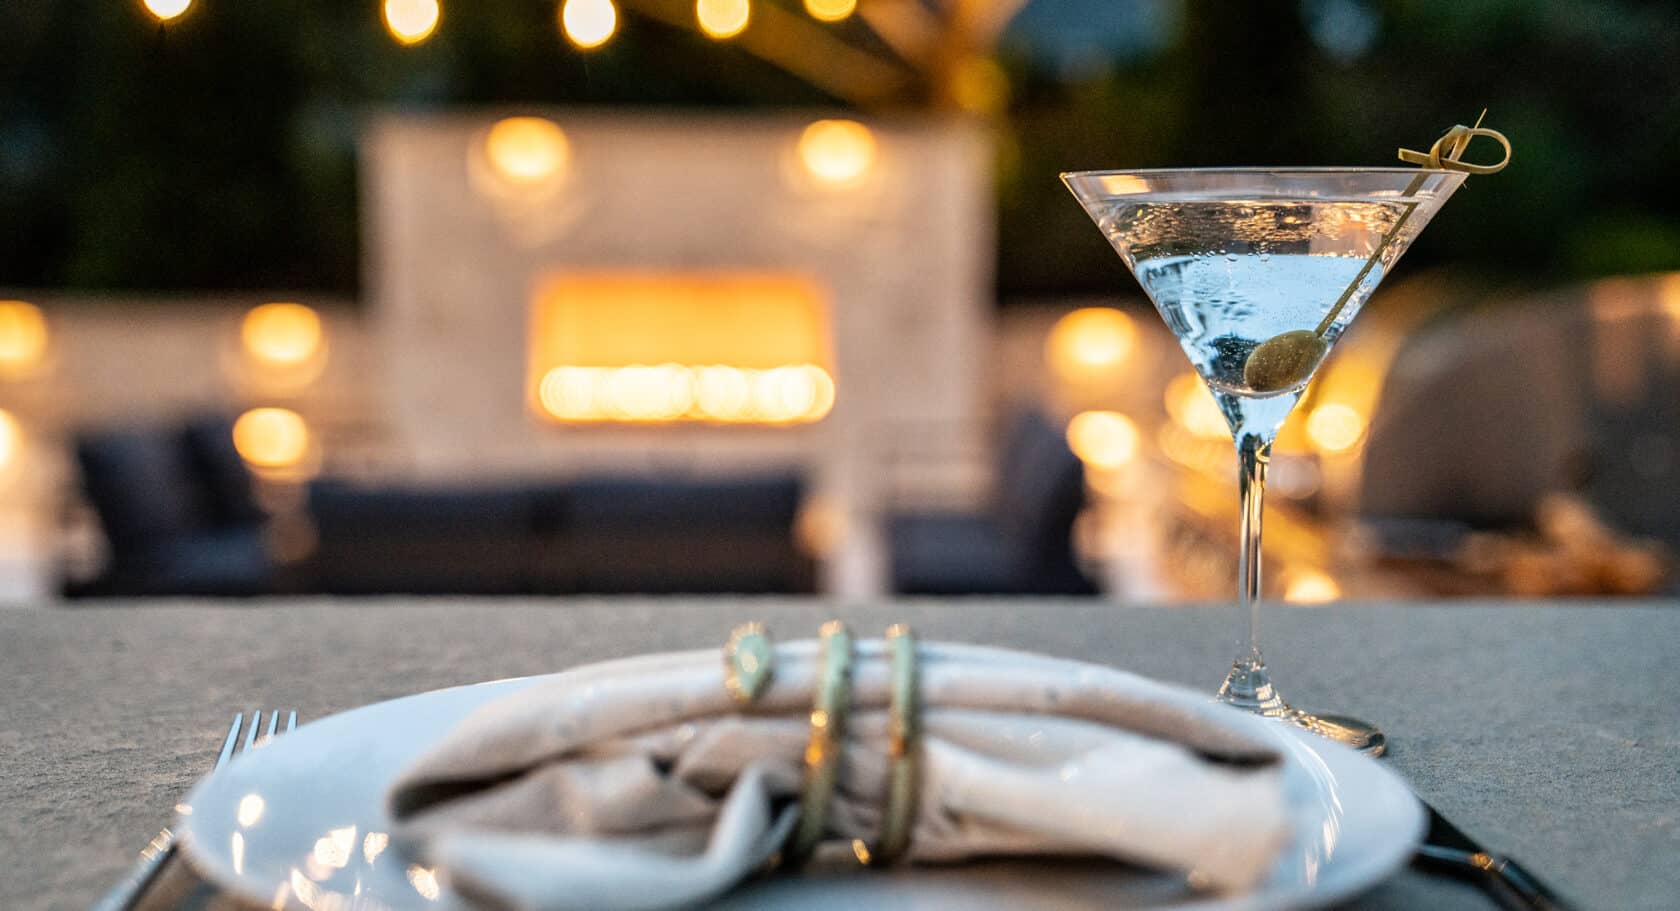 Evening martinis at the patio bar overlooking a glowing gas fireplace with outdoor string lights.